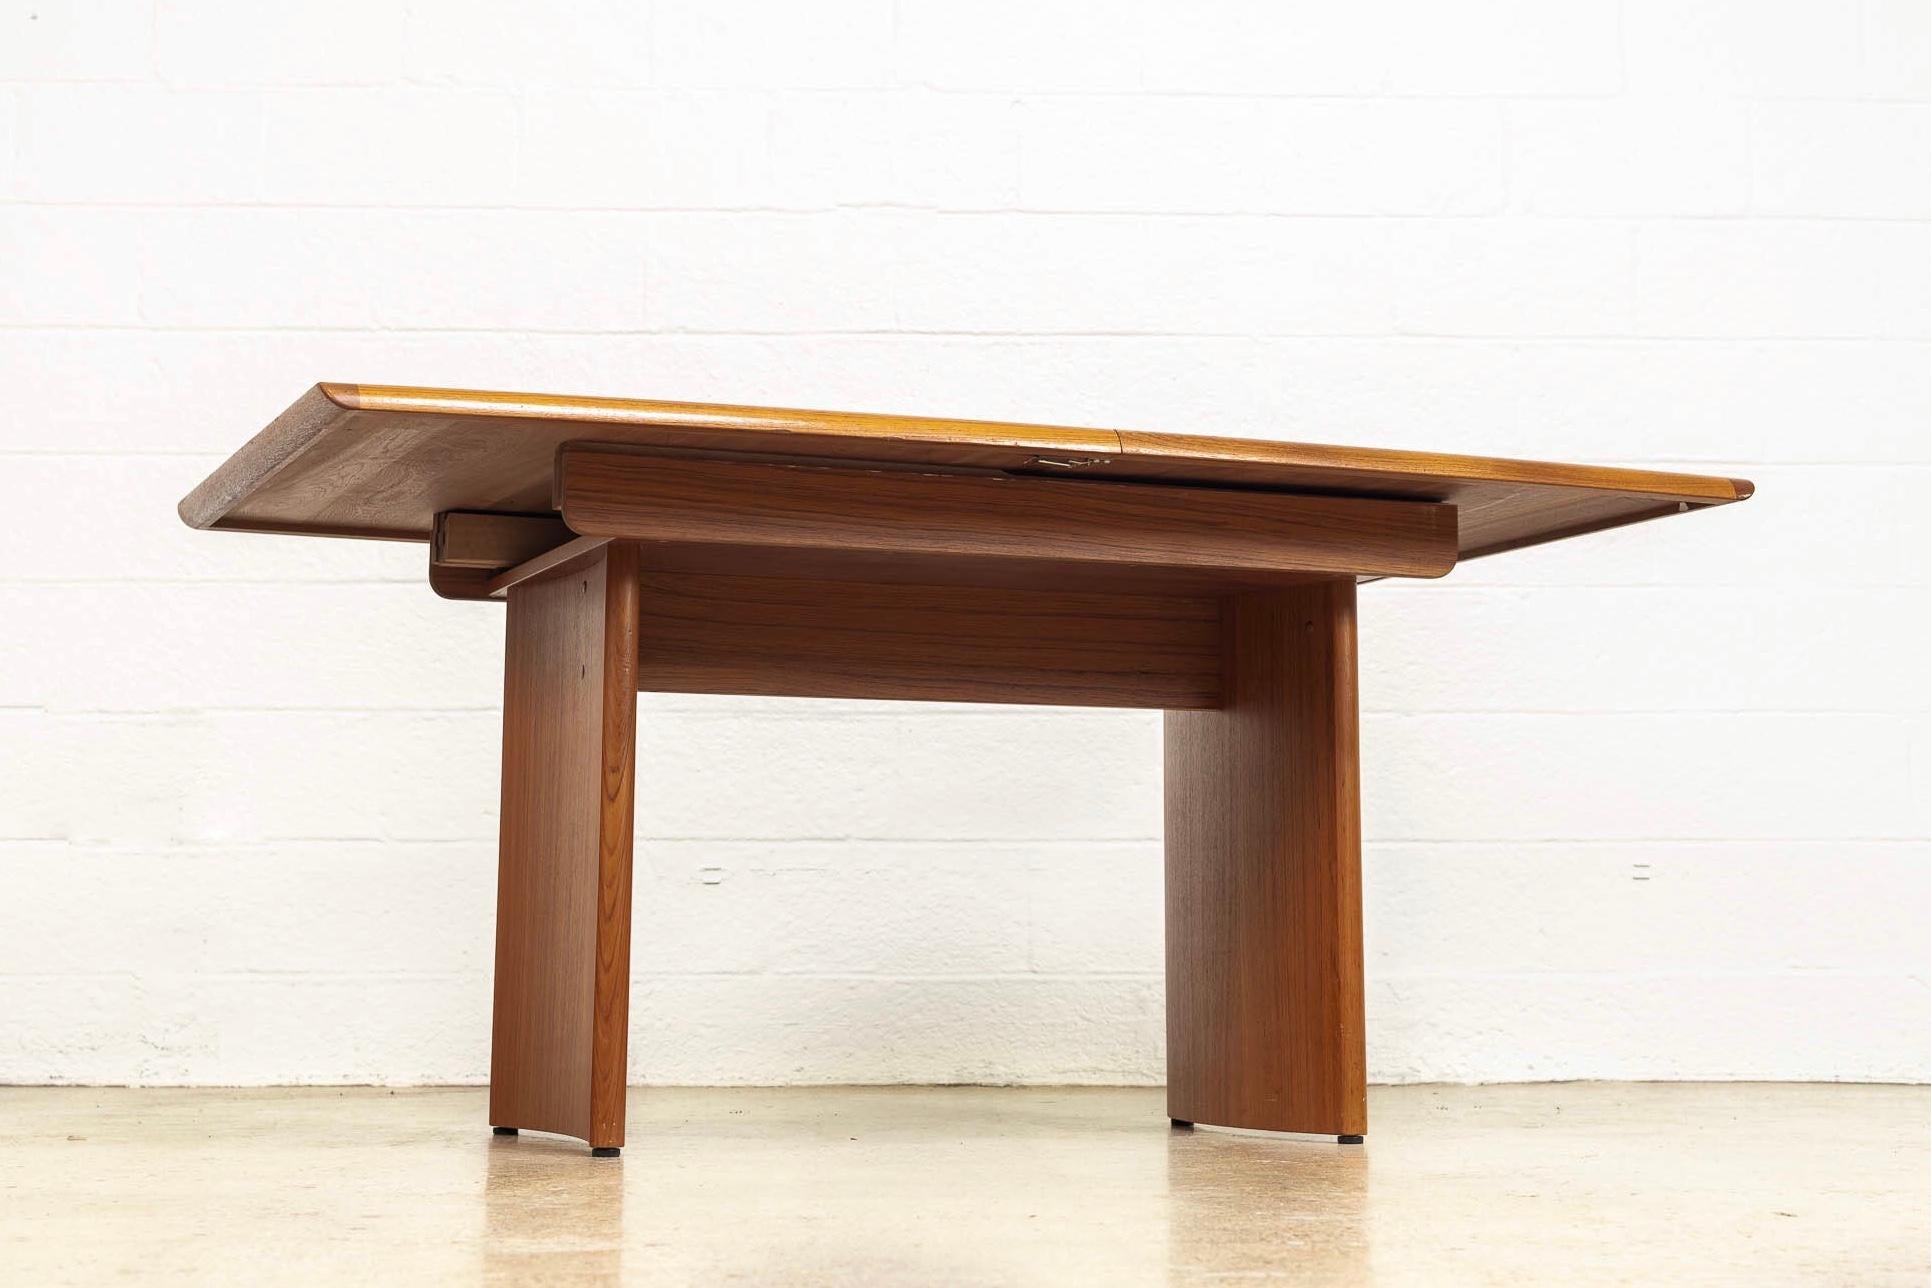 Vintage Danish Modern Teak Wood Extendable Dining Table with Two Leaves, 1960s For Sale 1